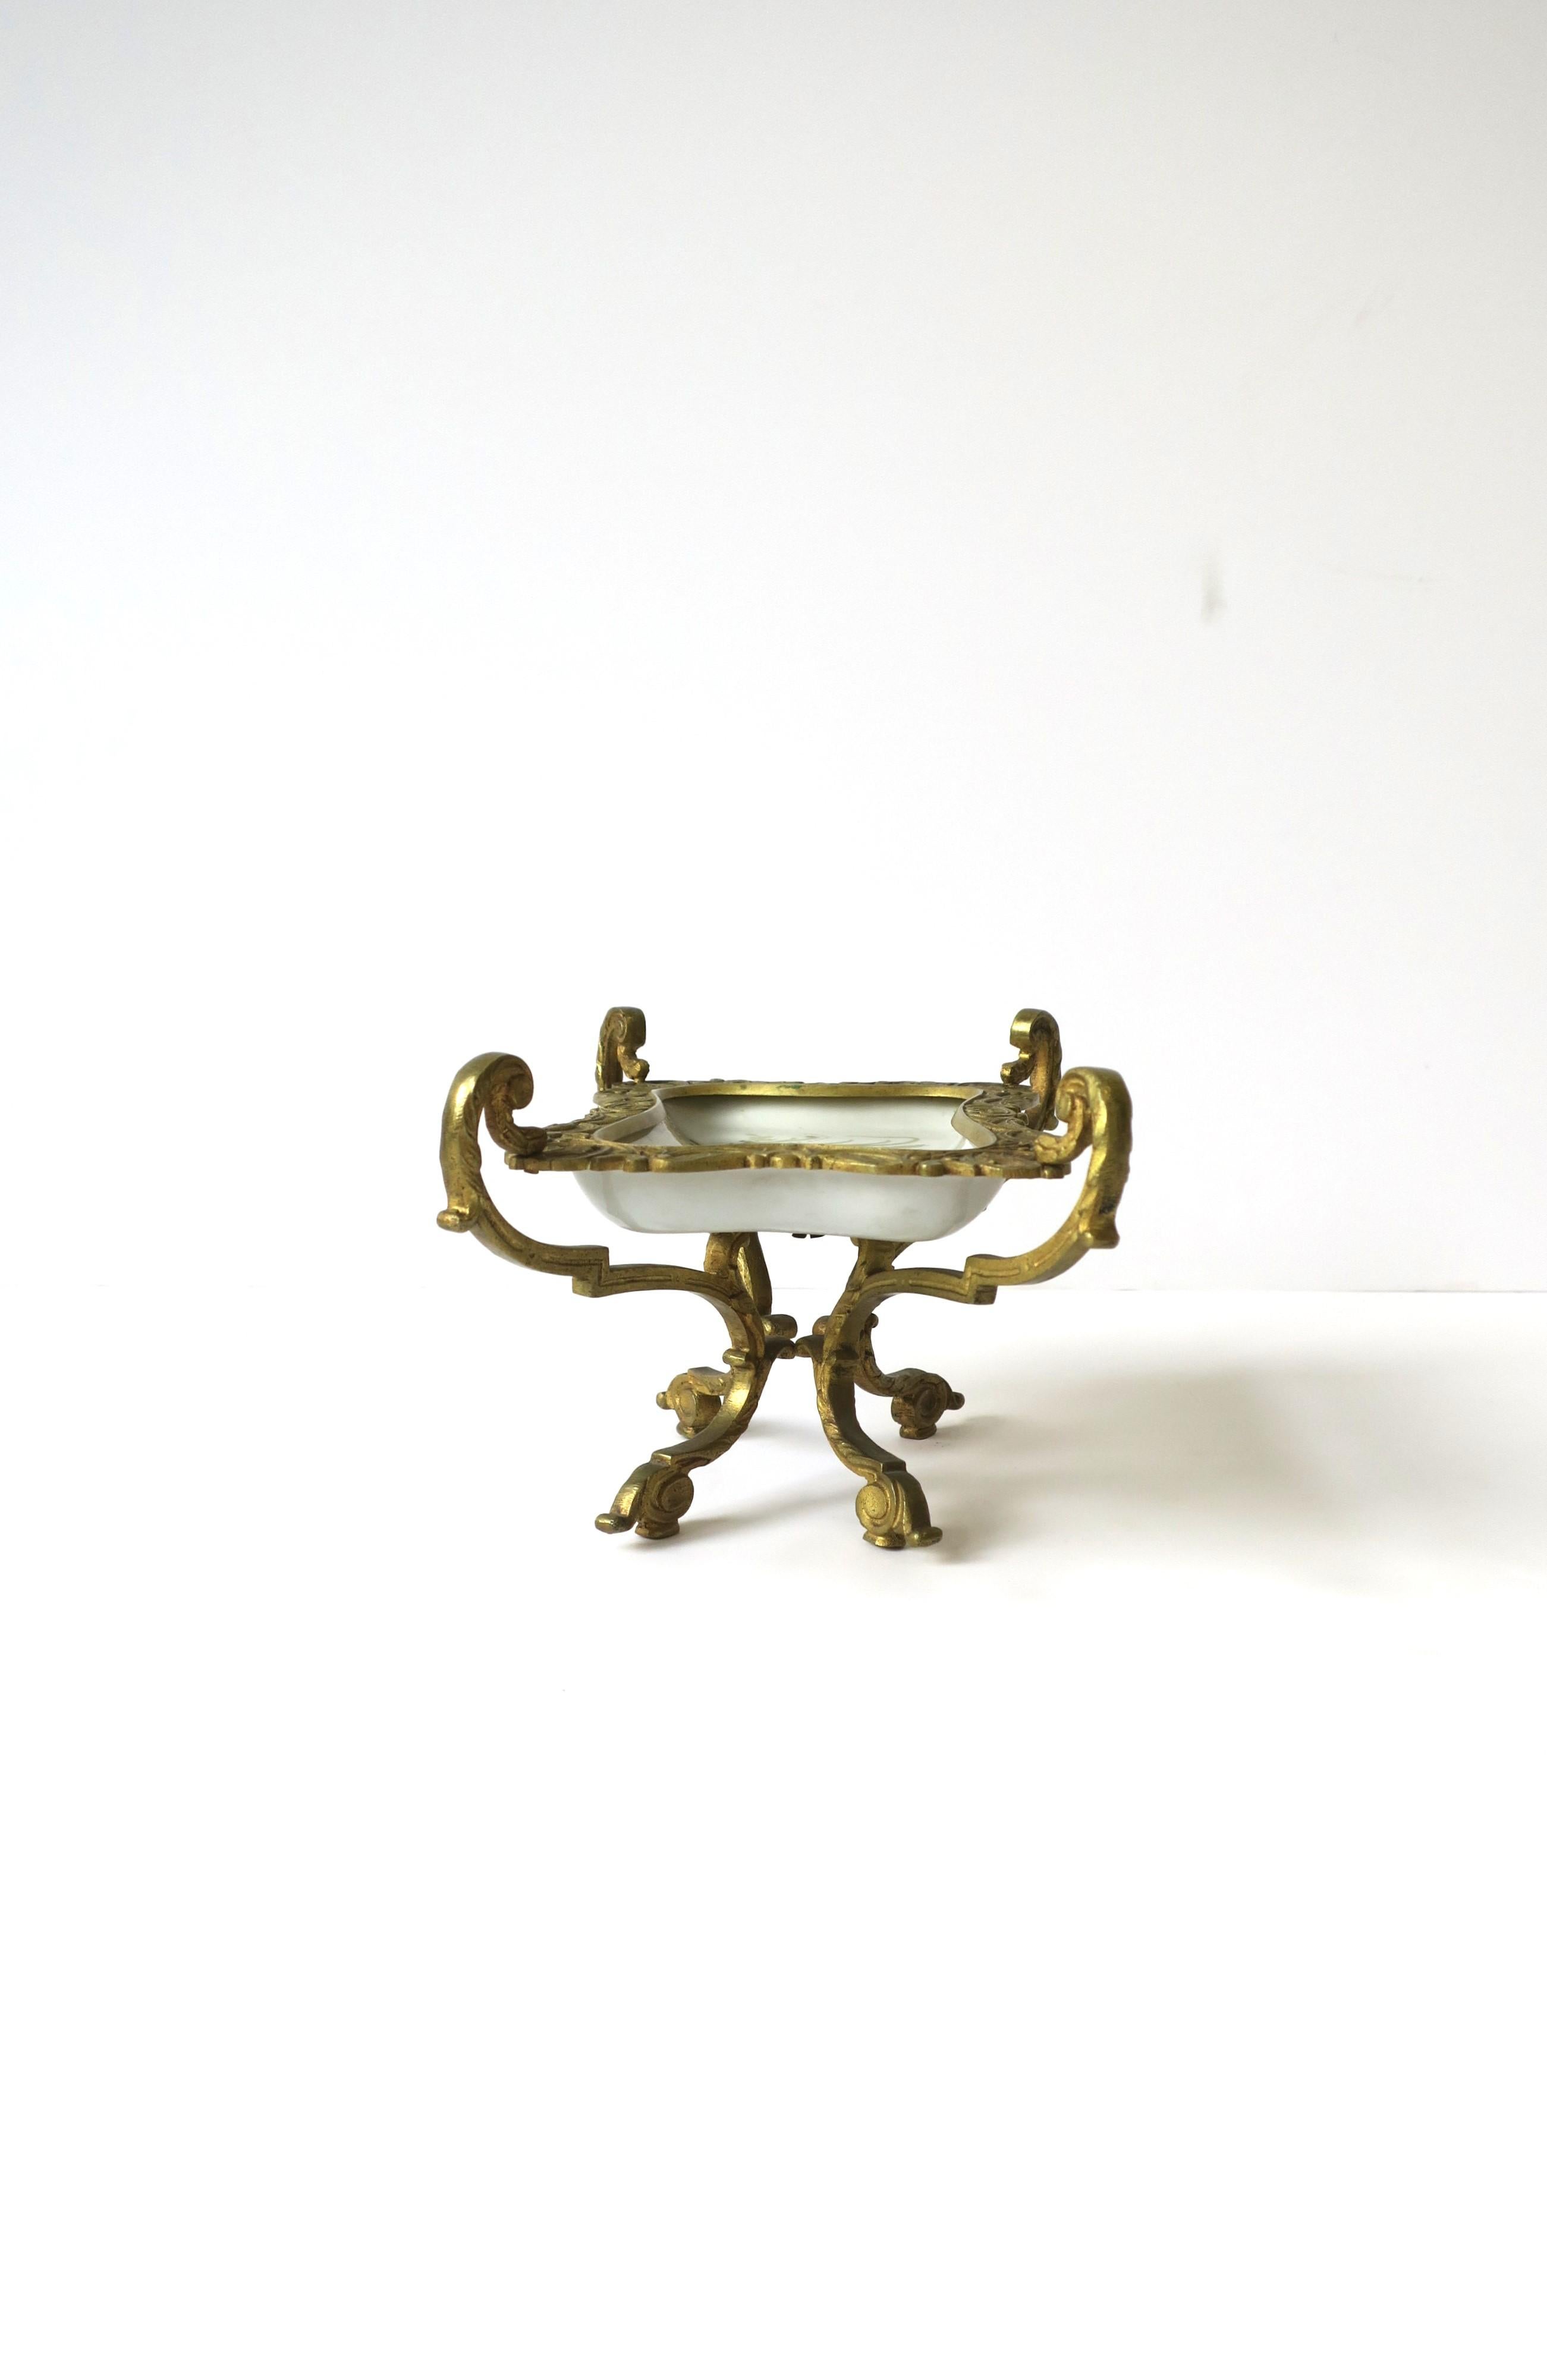 French Sevres Porcelain & Brass Ormolu Soap or Jewlery Dish Rococo, 18th Century For Sale 6